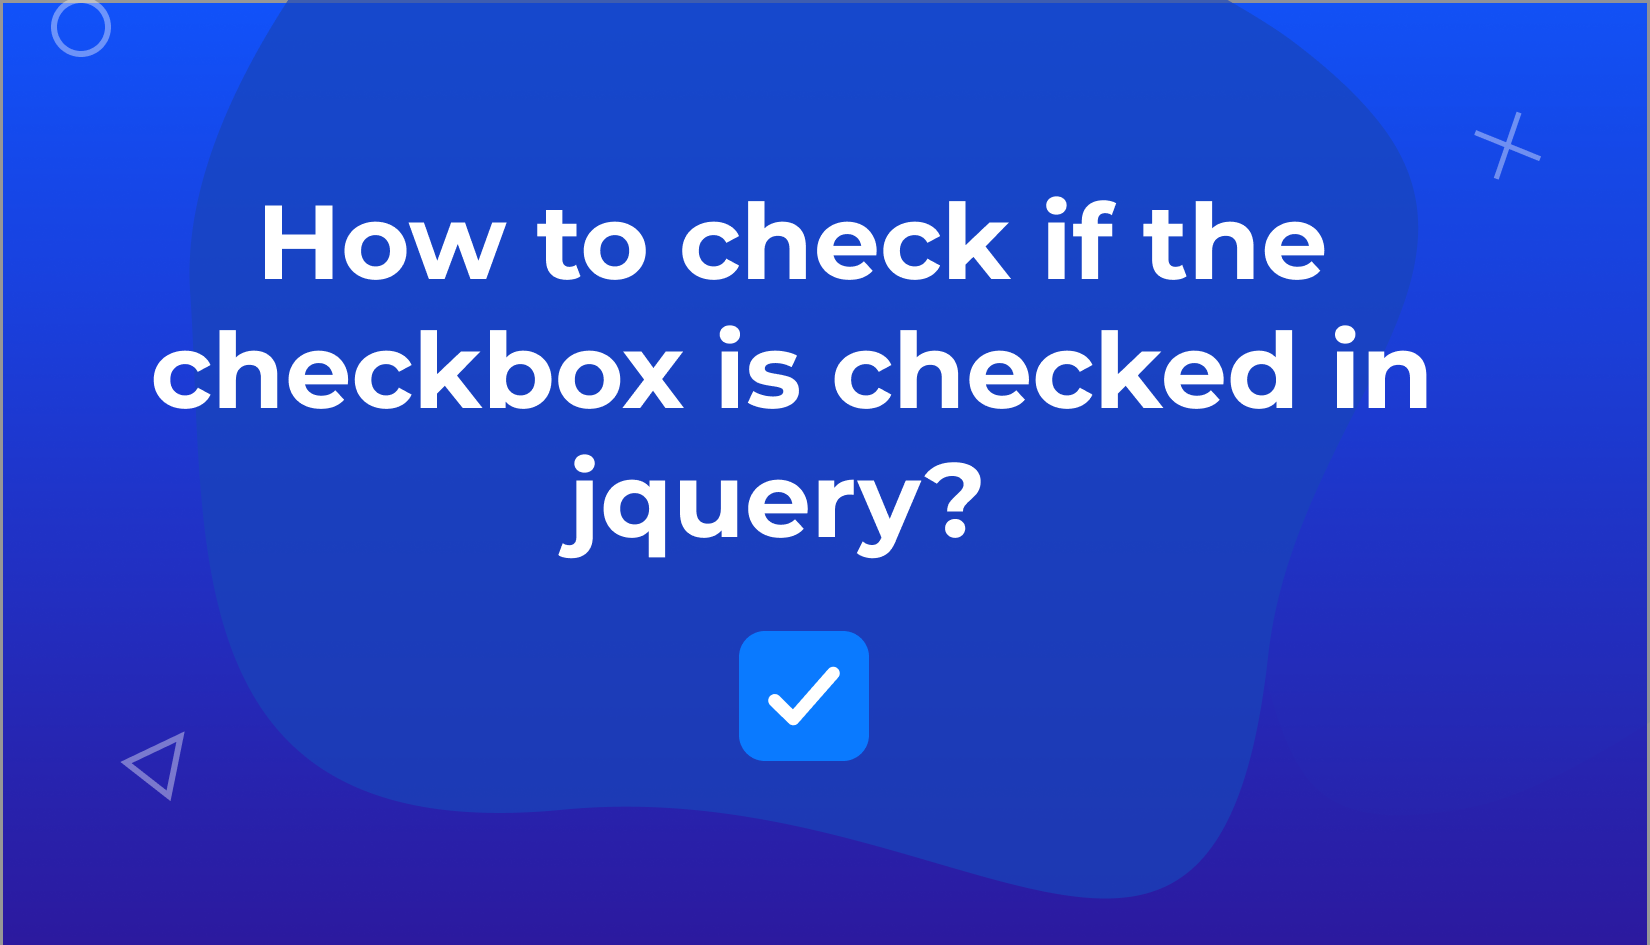 How to check if the checkbox is checked in jquery?